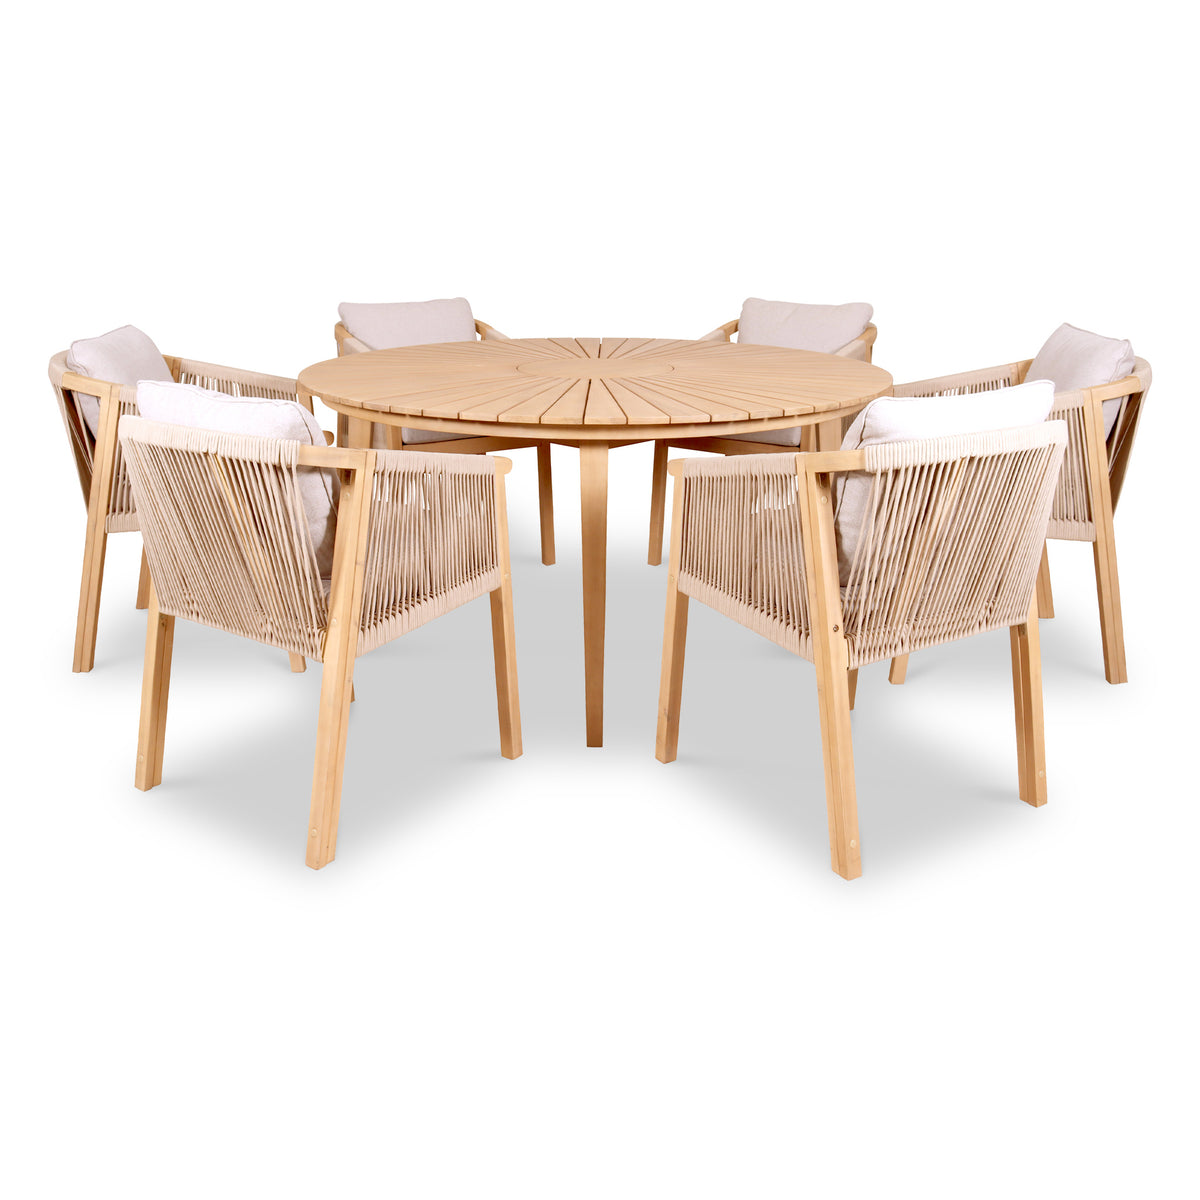 Roma FSC 150cm Table 6 Roma Deluxe Chairs from Roseland Furniture